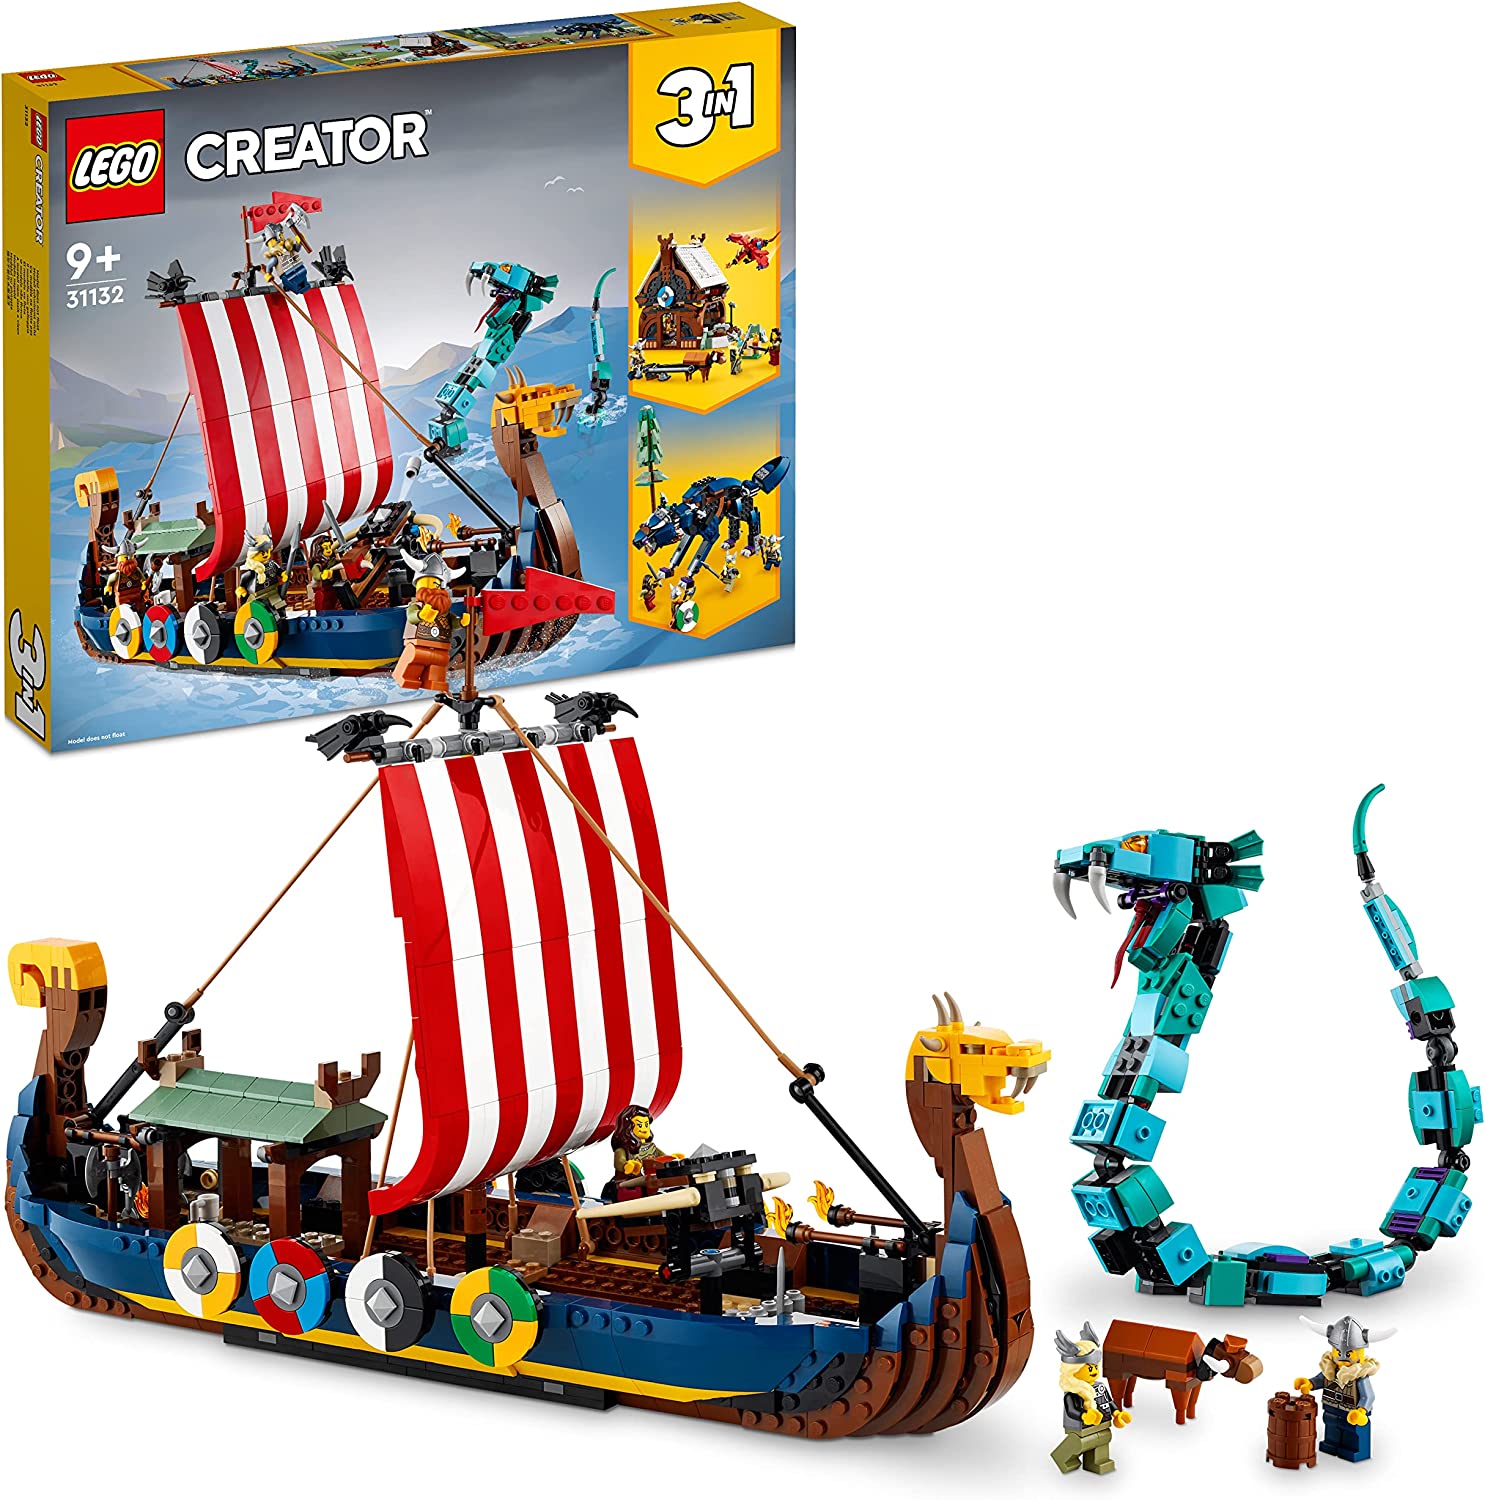 LEGO 31132 Creator 3-in-1 Viking Ship with Midgard Snake Set with Ship, House, Toy Wolf and Animal Figures, Birthday Gift for Children